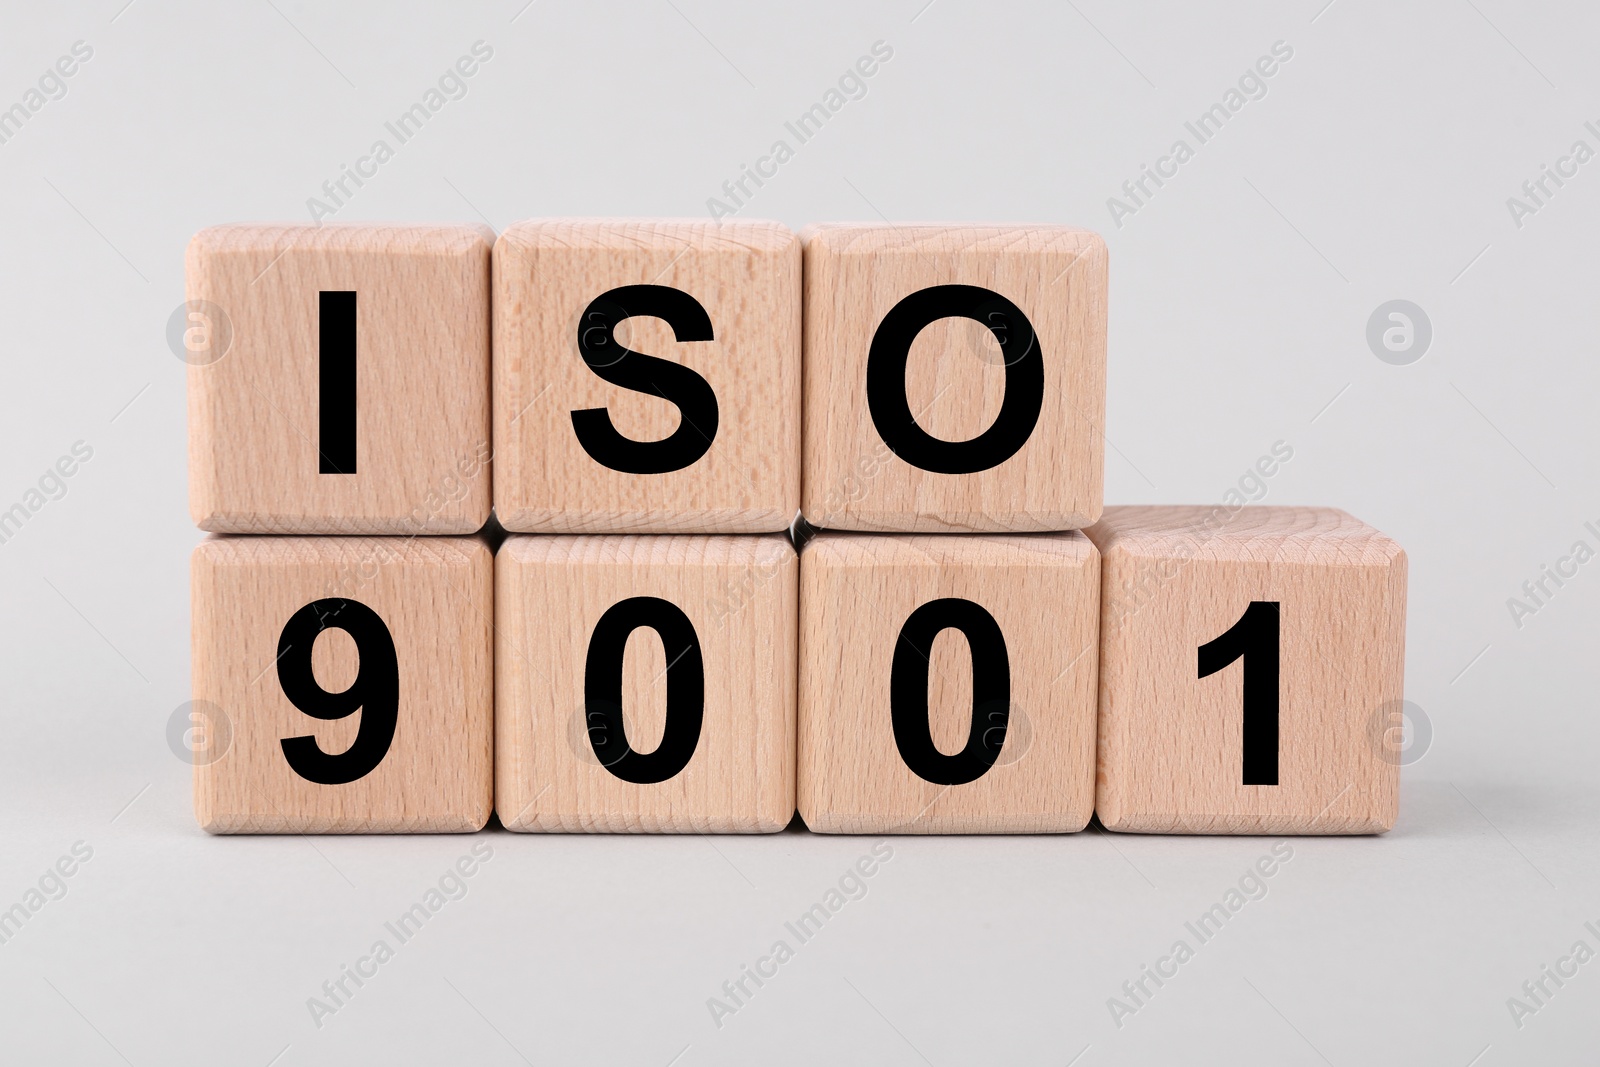 Photo of International Organization for Standardization. Wooden cubes with abbreviation ISO and number 9001 on light grey background